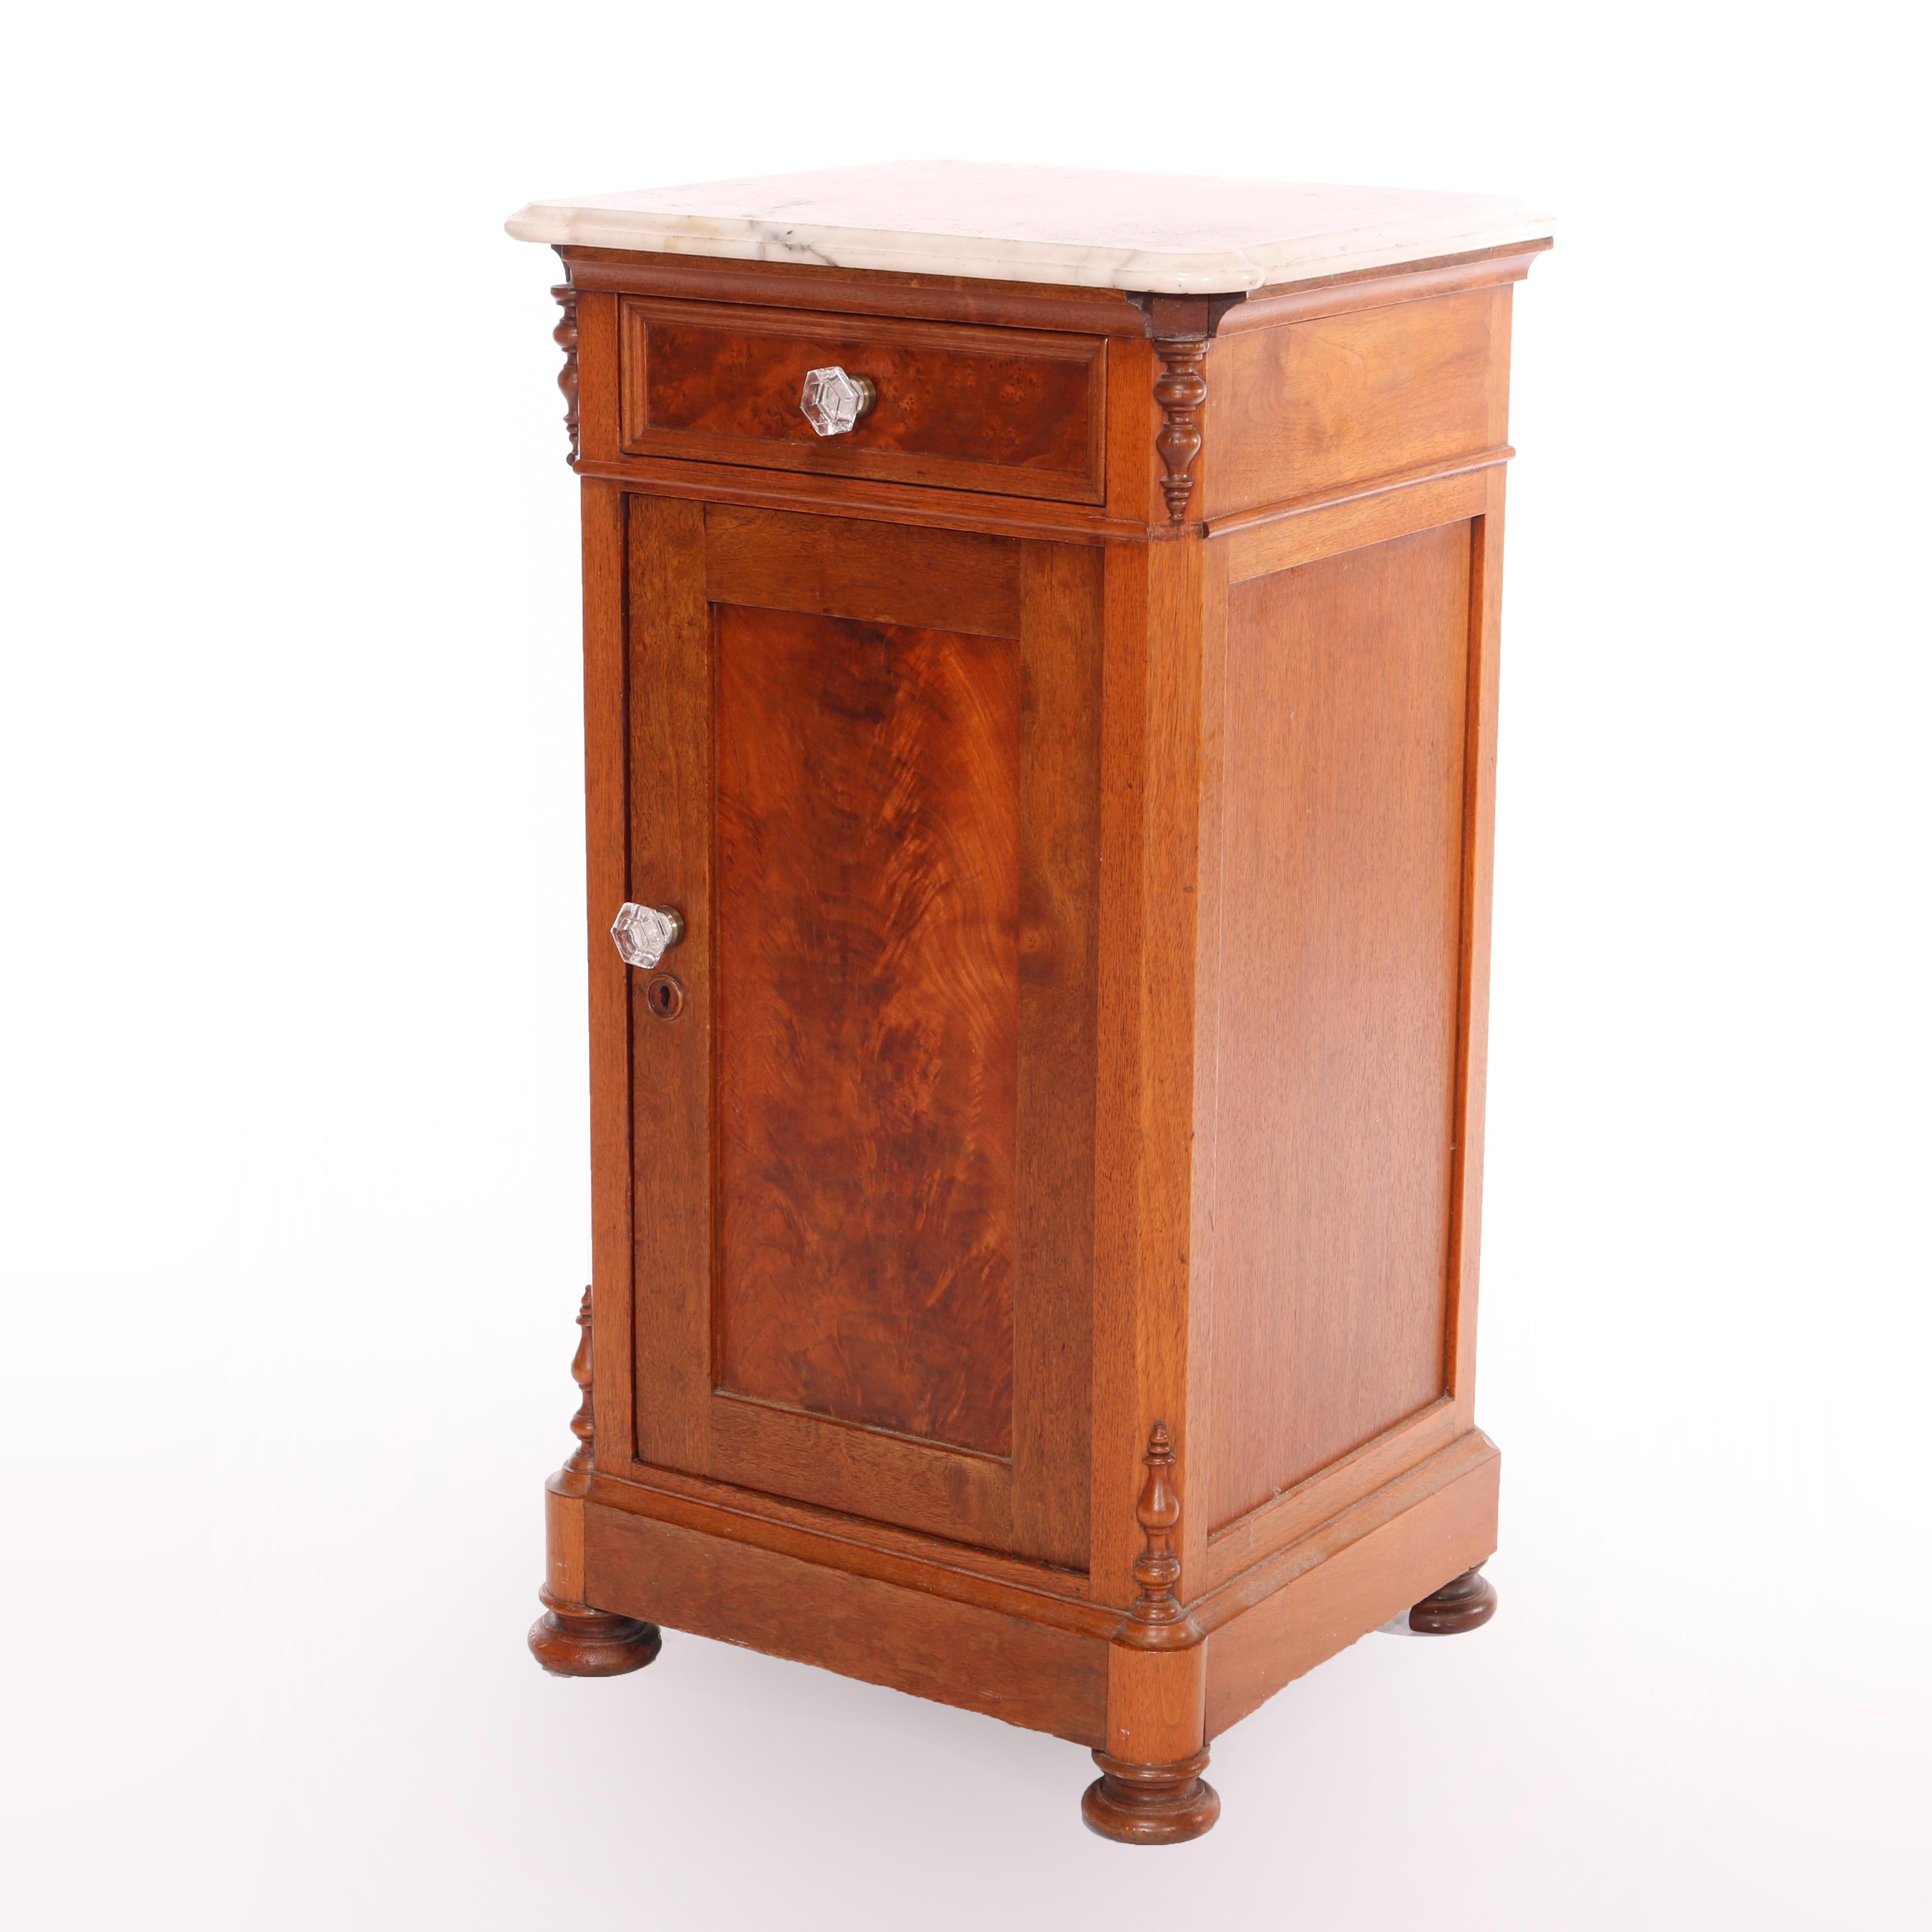 An antique half commode night stand offers beveled marble top over walnut and burl paneled case having upper drawer over lower cabinet with shelved interior, seated on bun feet, c1890

Measures - 31.75'' H x 17.25'' W x 16'' D.